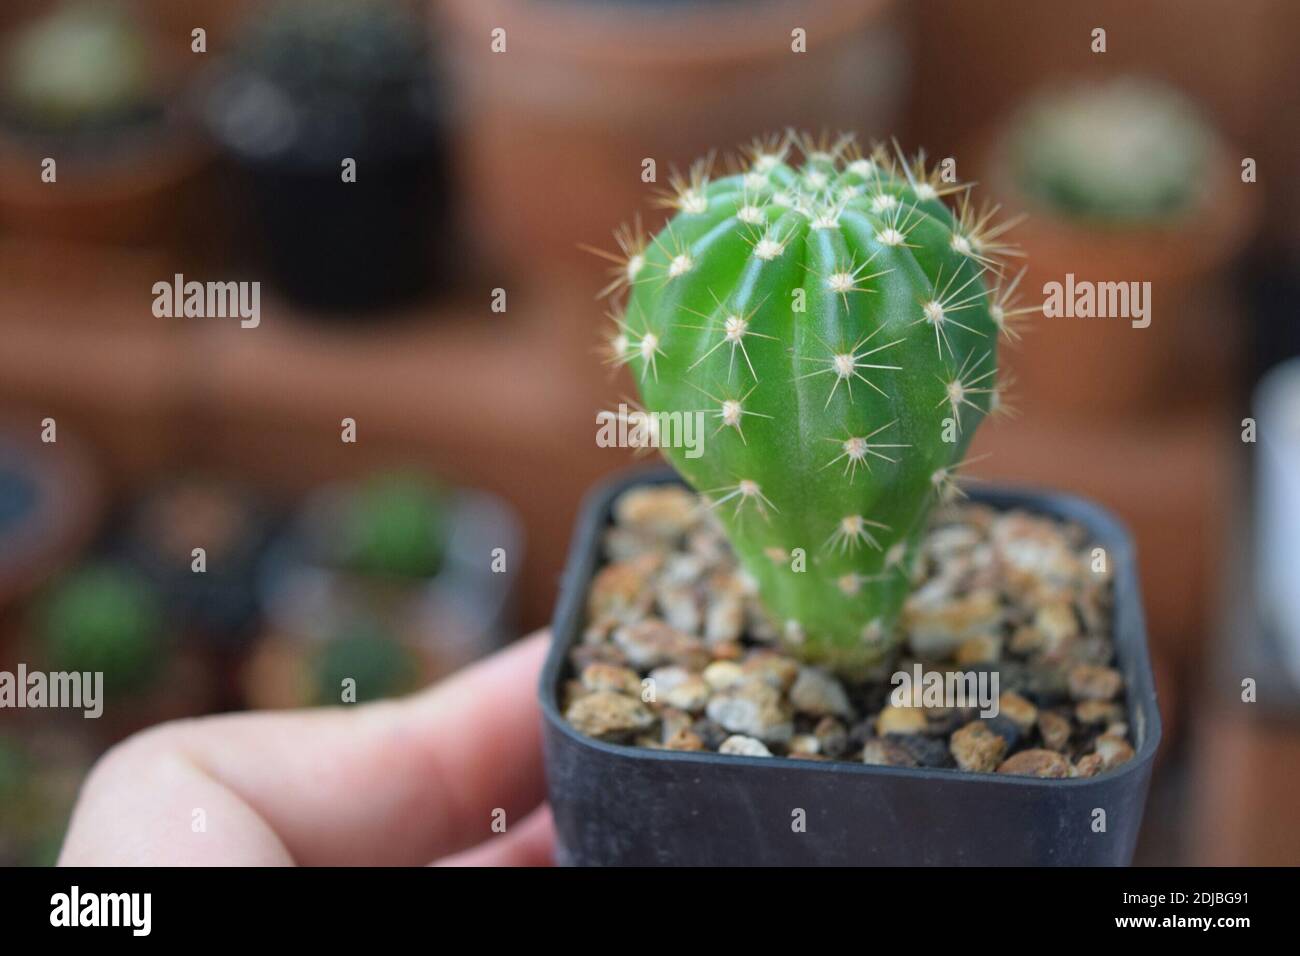 Cropped Hand Holding Succulent Plant Stock Photo